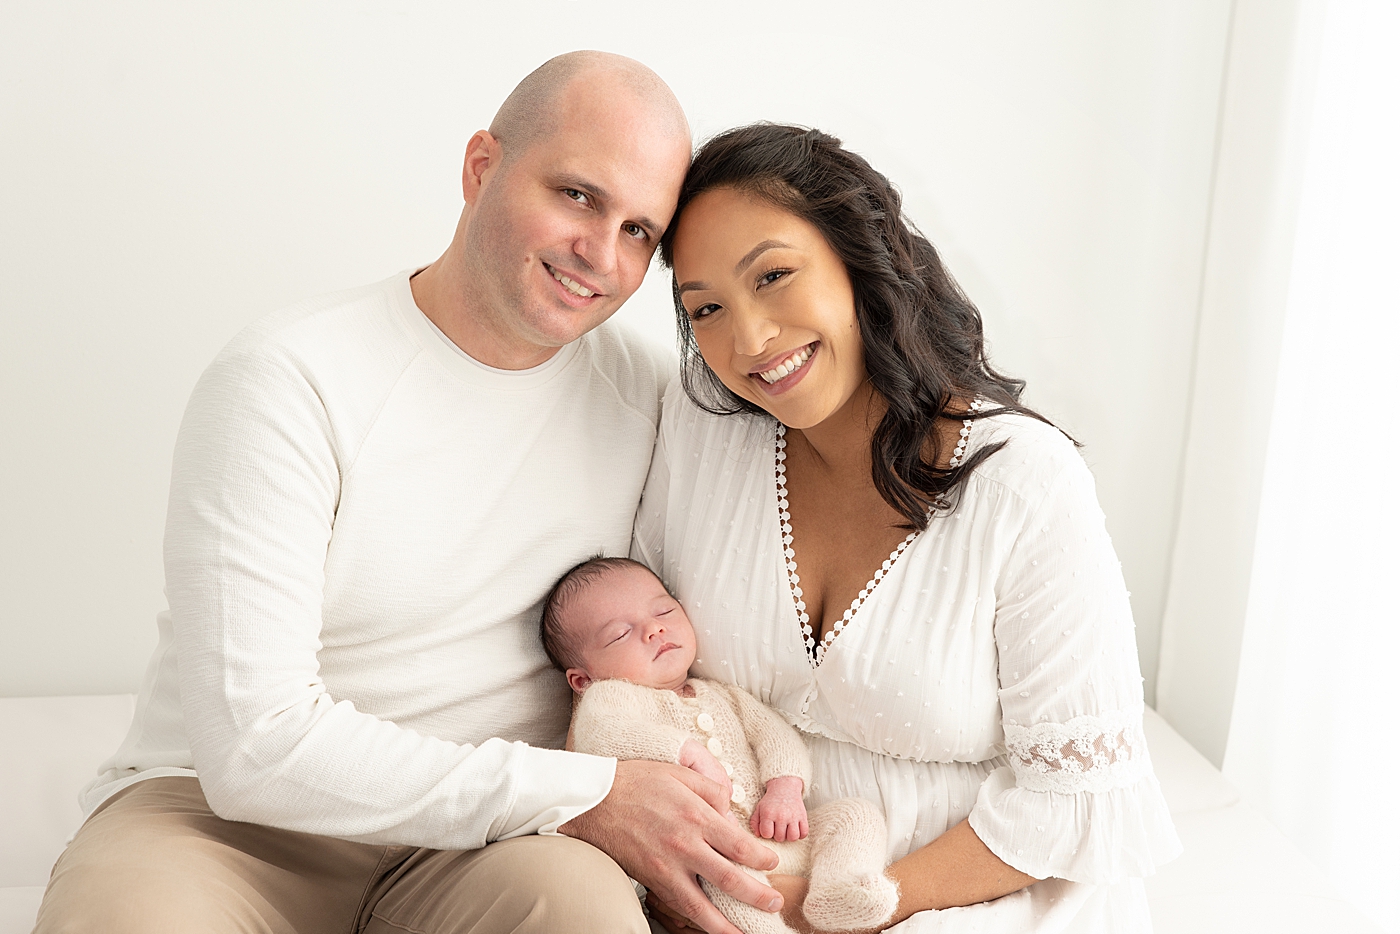 Mom and Dad with their newborn baby boy. Photo by Rachel Brookes Photography.